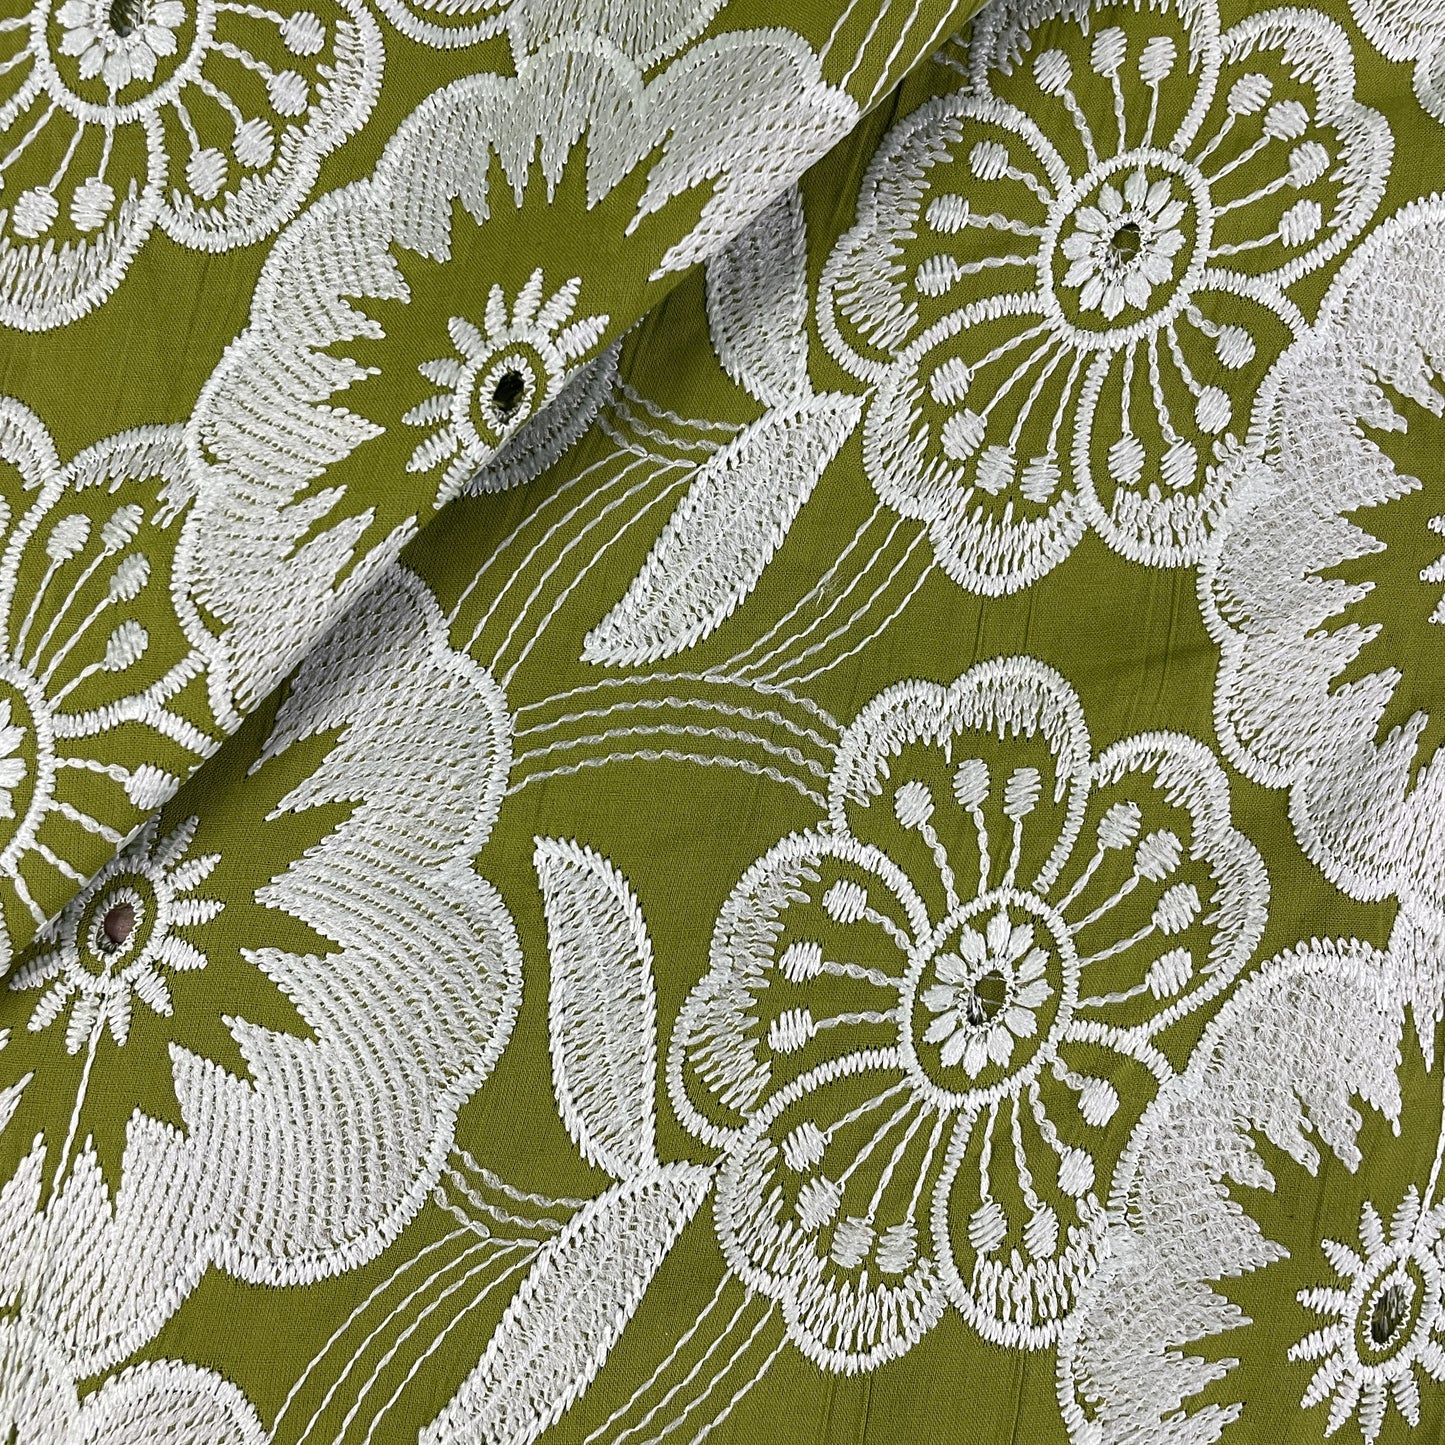 Exclusive Cotton Schiffli Light Green Tropical Embroidery Fabric